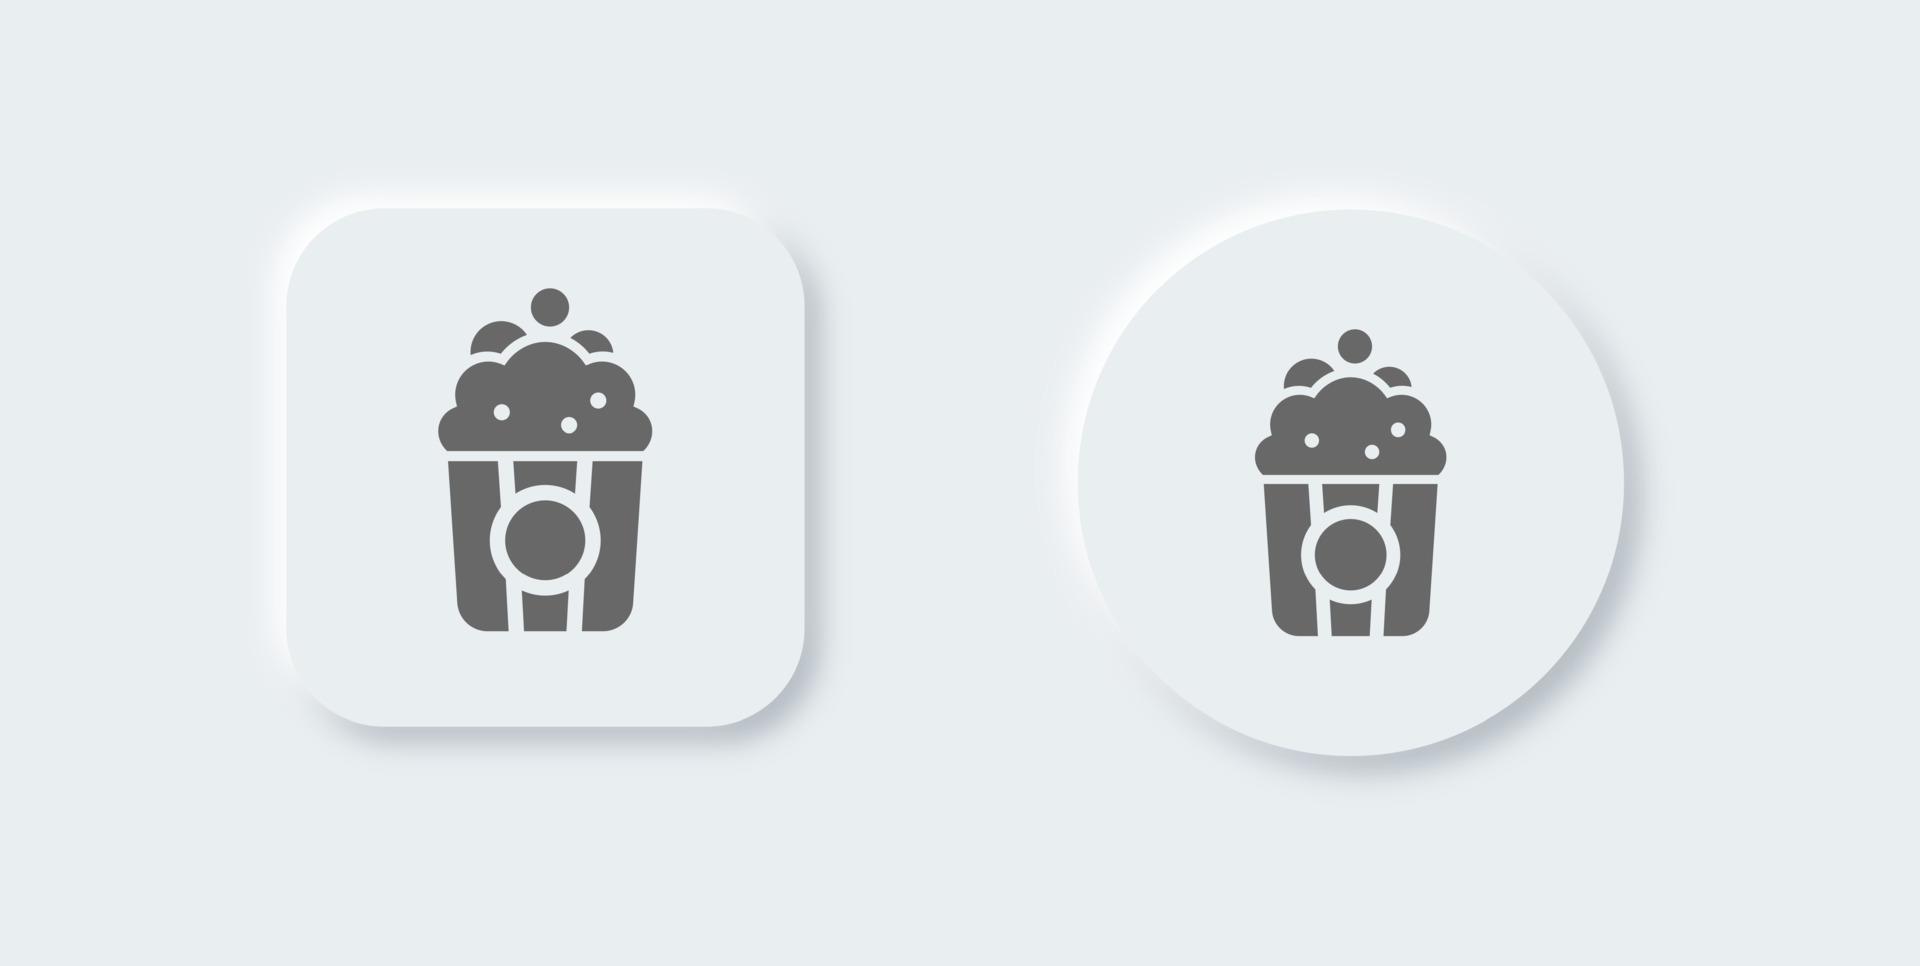 Popcorn solid icon in neomorphic design style. Entertainment signs vector illustration.